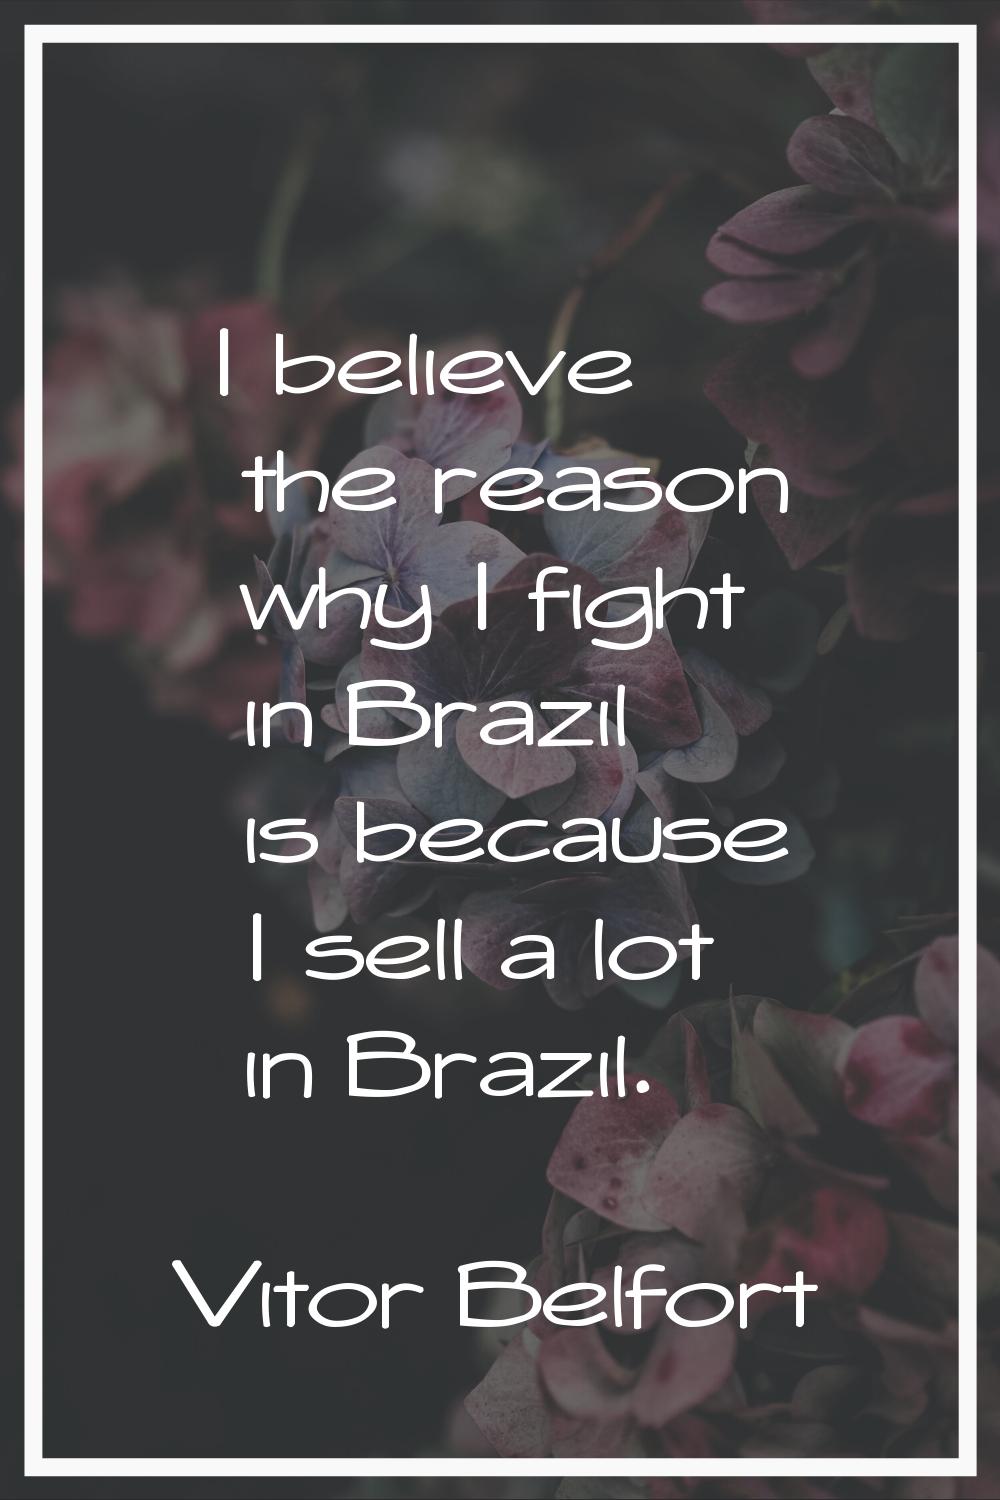 I believe the reason why I fight in Brazil is because I sell a lot in Brazil.